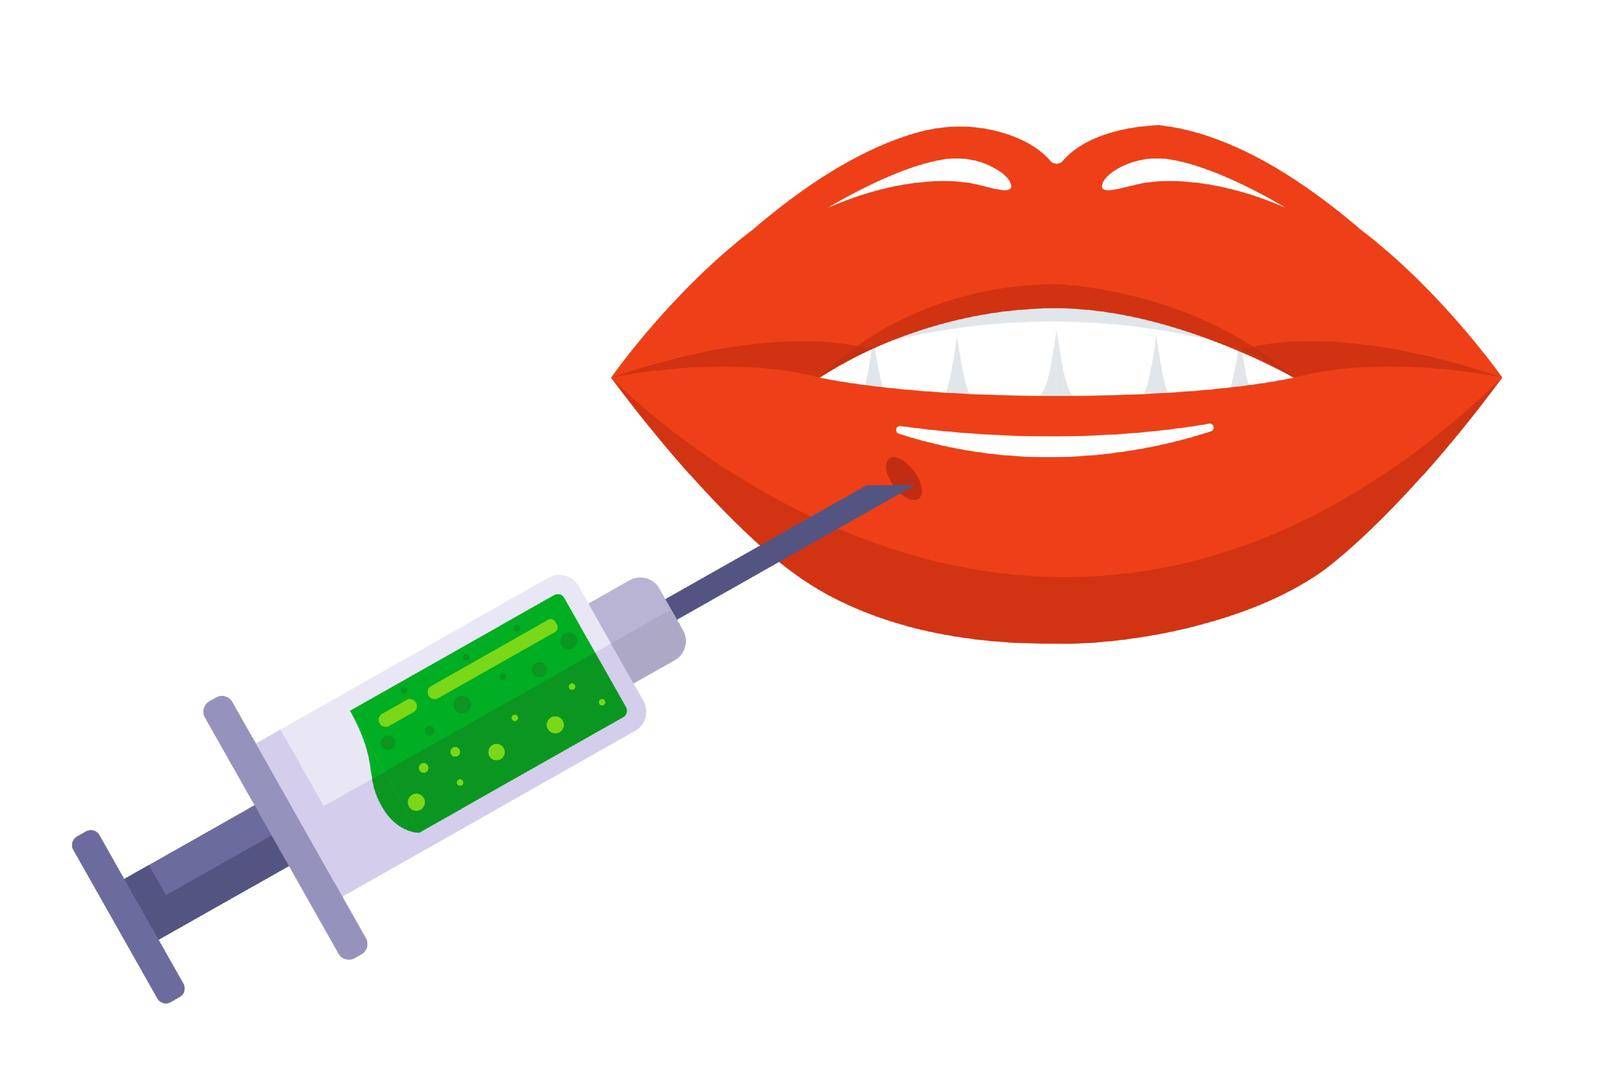 increase the size of the lips with an injection. cosmetic procedure for women. flat vector illustration.